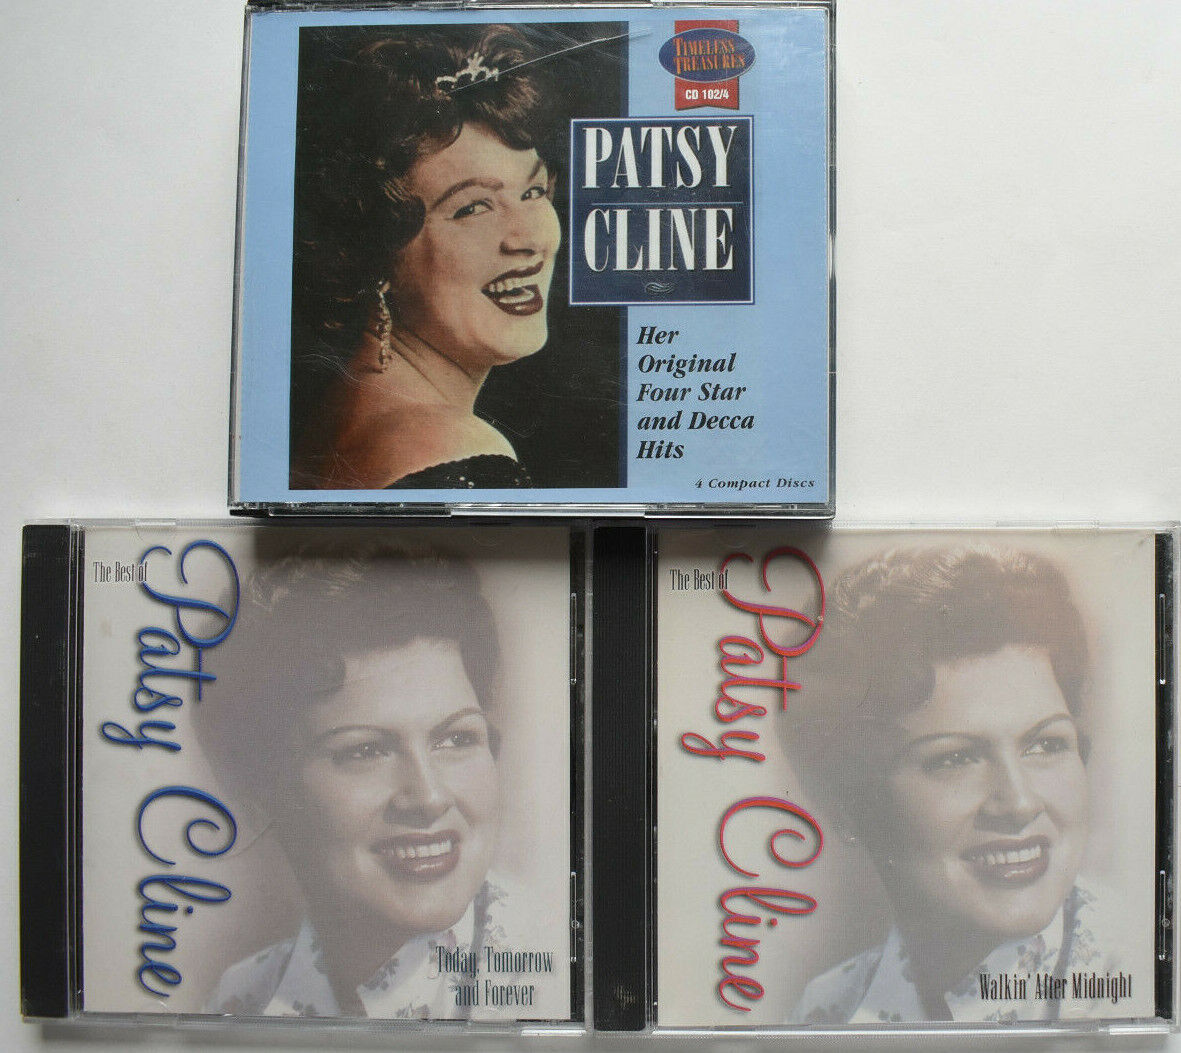 PATSY CLINE 6 CD LOT FOUR STAR DECCA HITS, WALKIN AFTER MIDNIGHT, TODAY TOMORROW